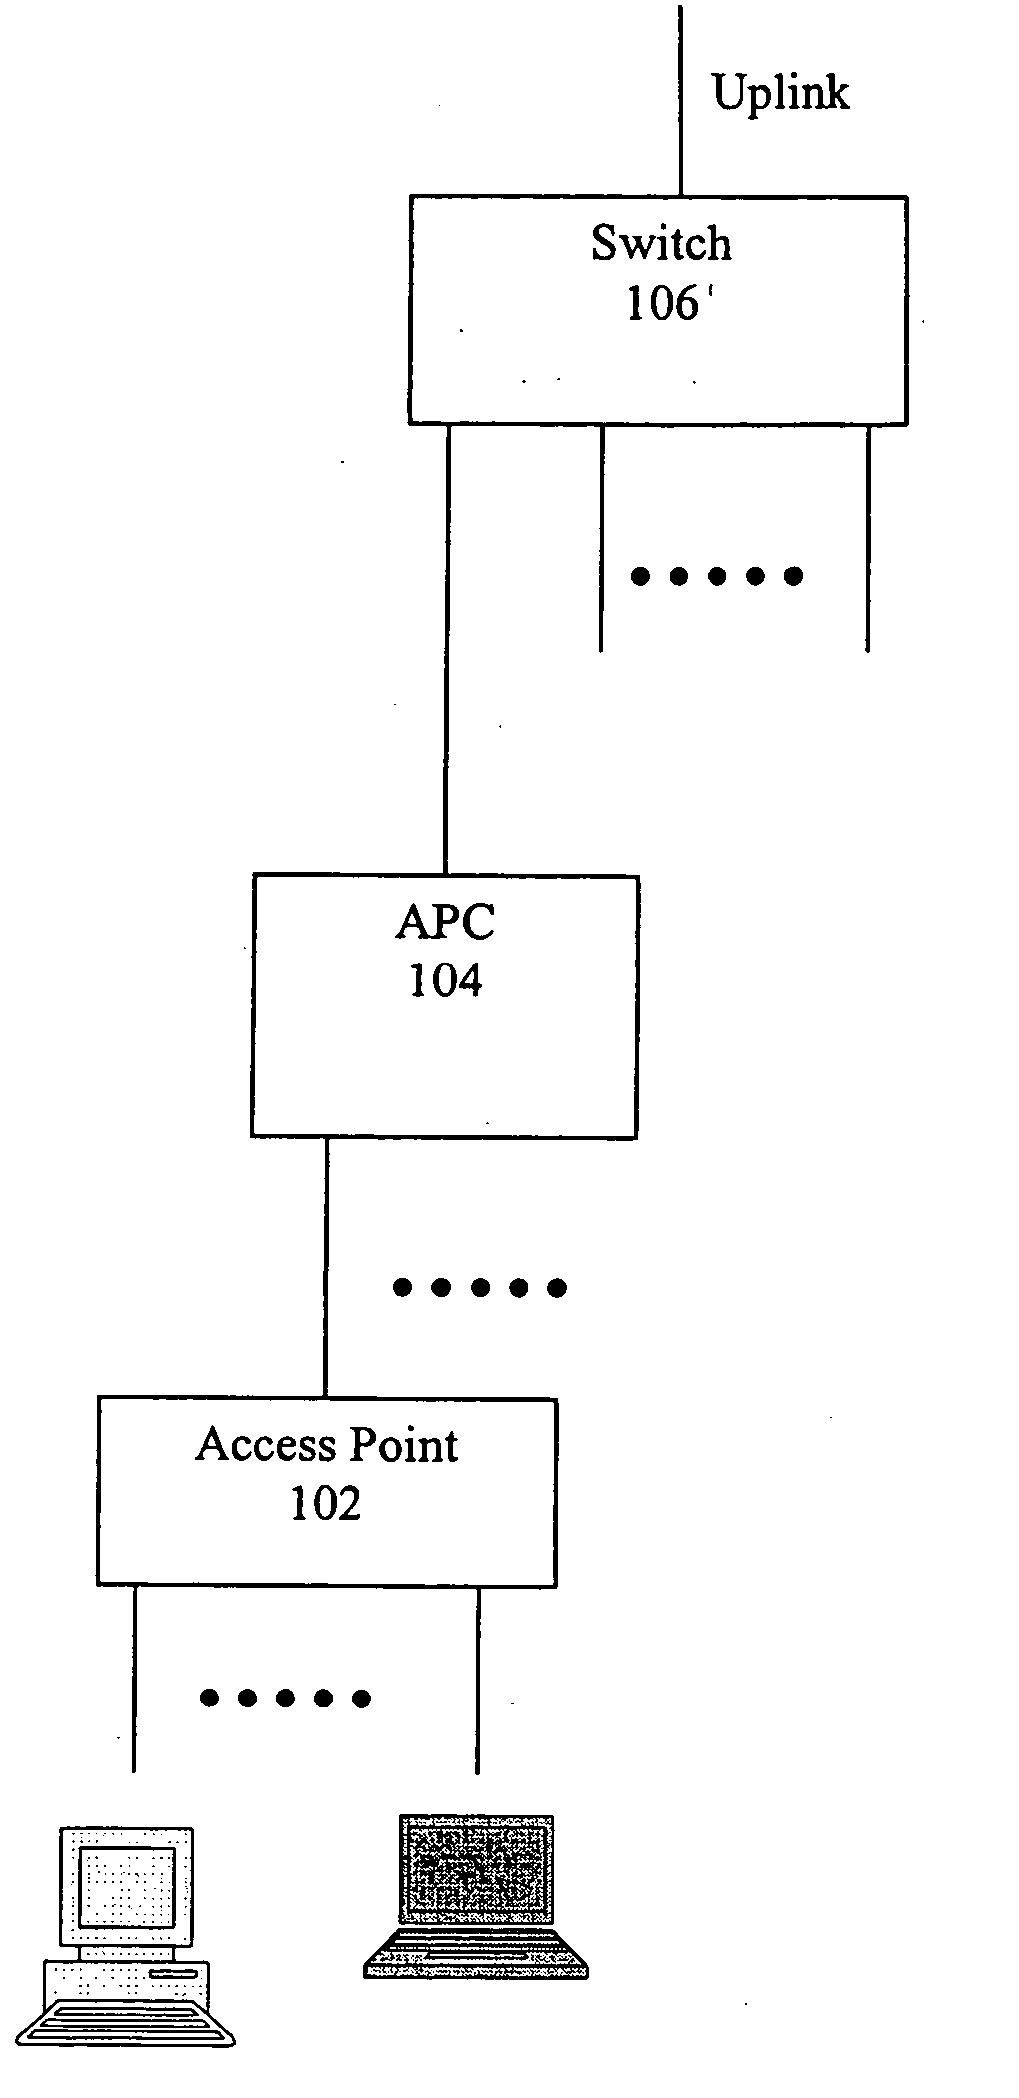 Hardware acceleration for unified IPSec and L2TP with IPSec processing in a device that integrates wired and wireless LAN, L2 and L3 switching functionality